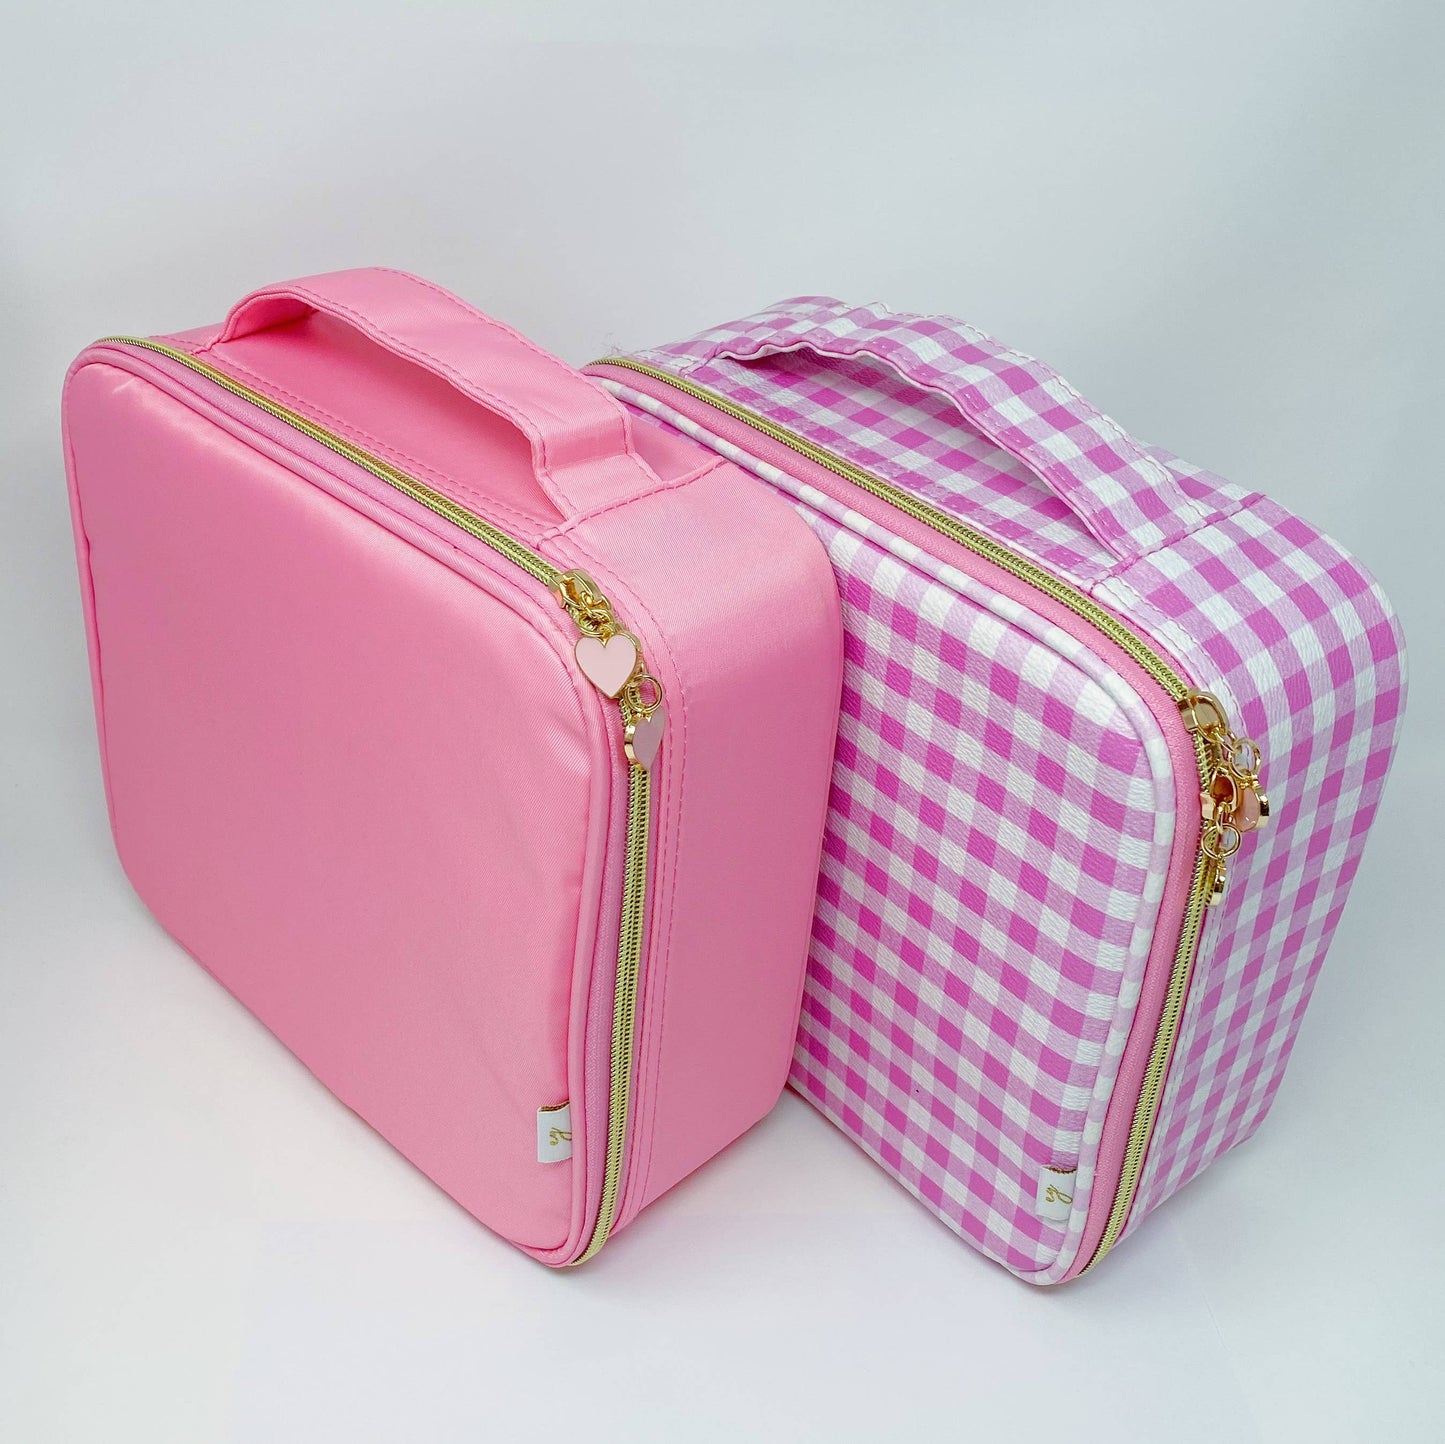 Glam Girl Cosmetic Case: Solid Pink